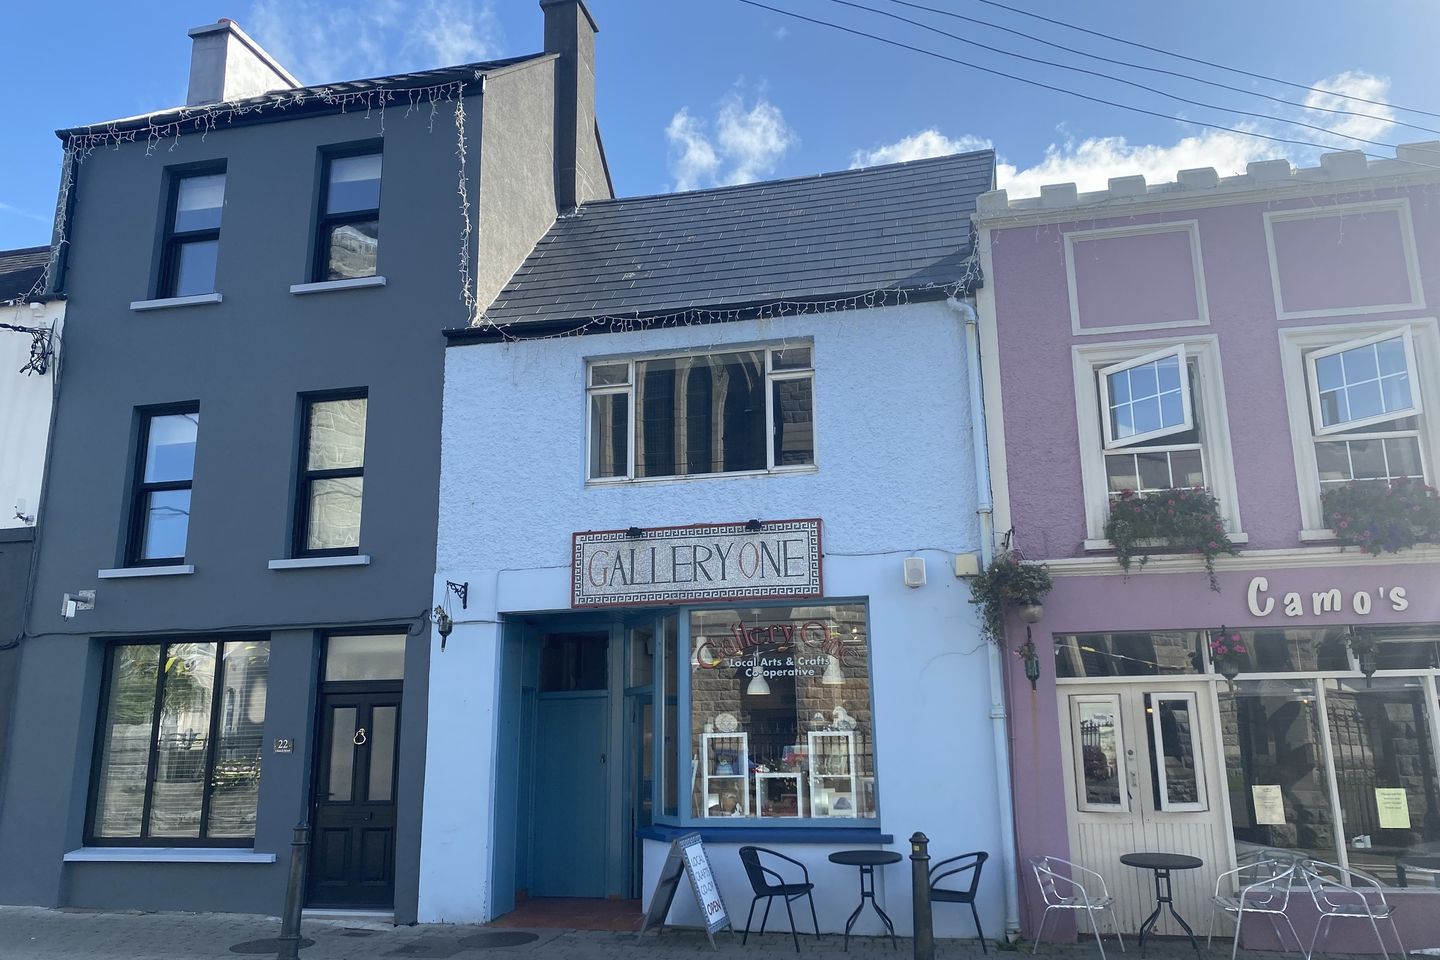 Ref 966 - Gallery One, 23 Church Street, Cahersiveen, Co. Kerry, V23PW86